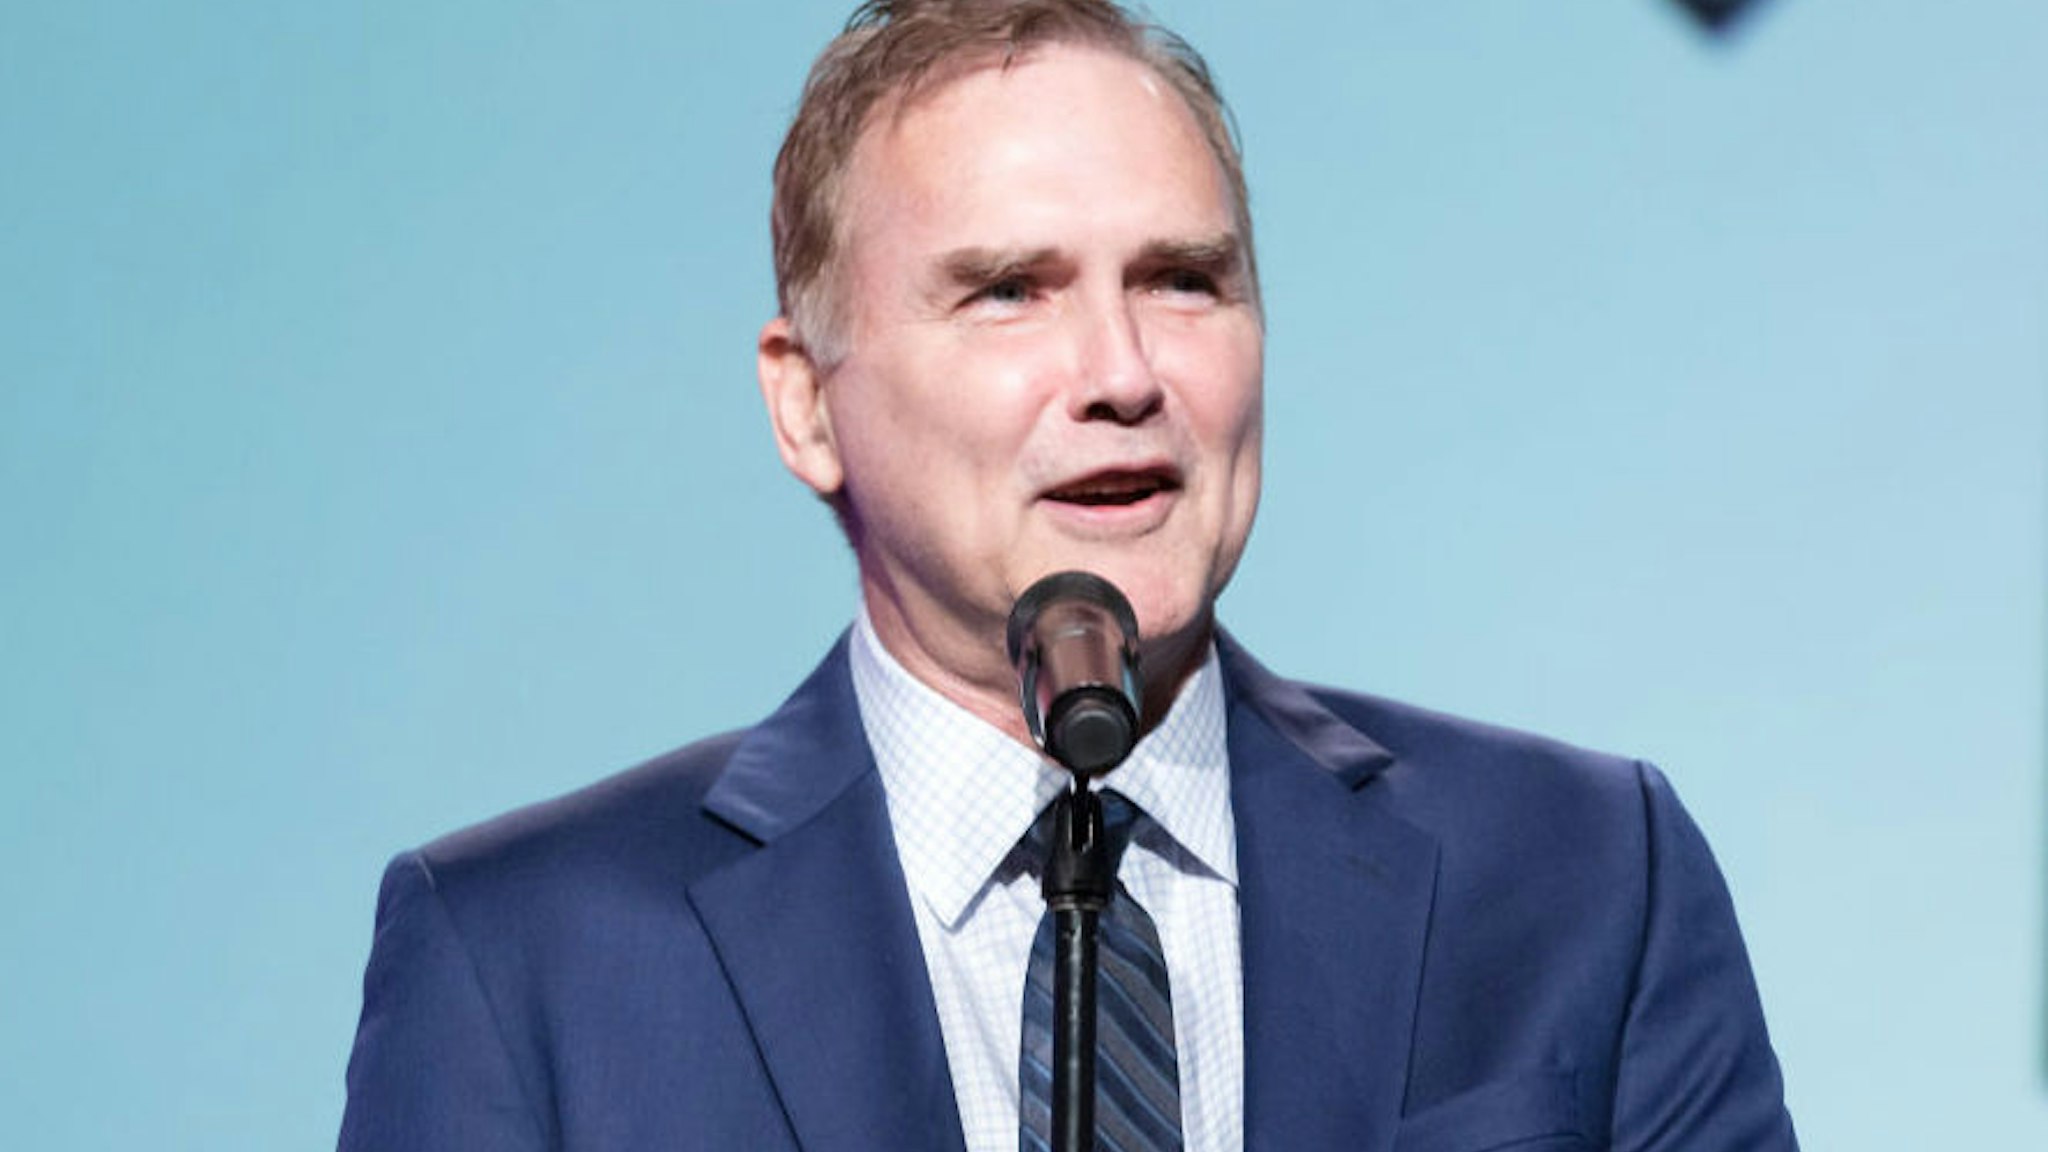 Comedian Norm MacDonald performs on stage at the Saban Community Clinic's 50th Anniversary Dinner Gala at The Beverly Hilton Hotel on November 13, 2017 in Beverly Hills, California.